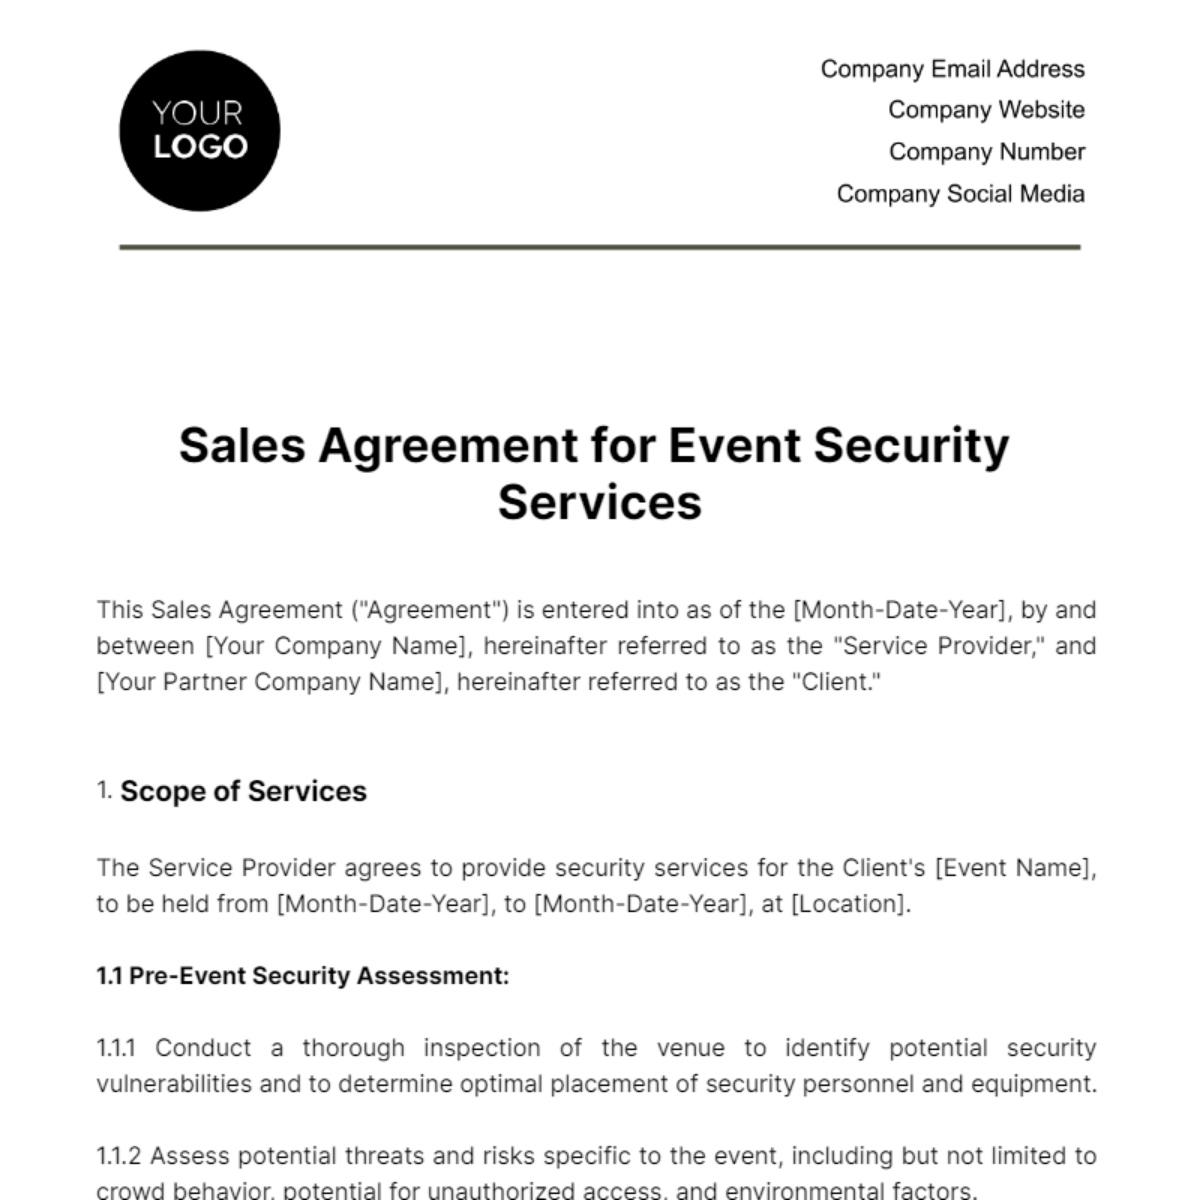 Sales Agreement for Event Security Services Template